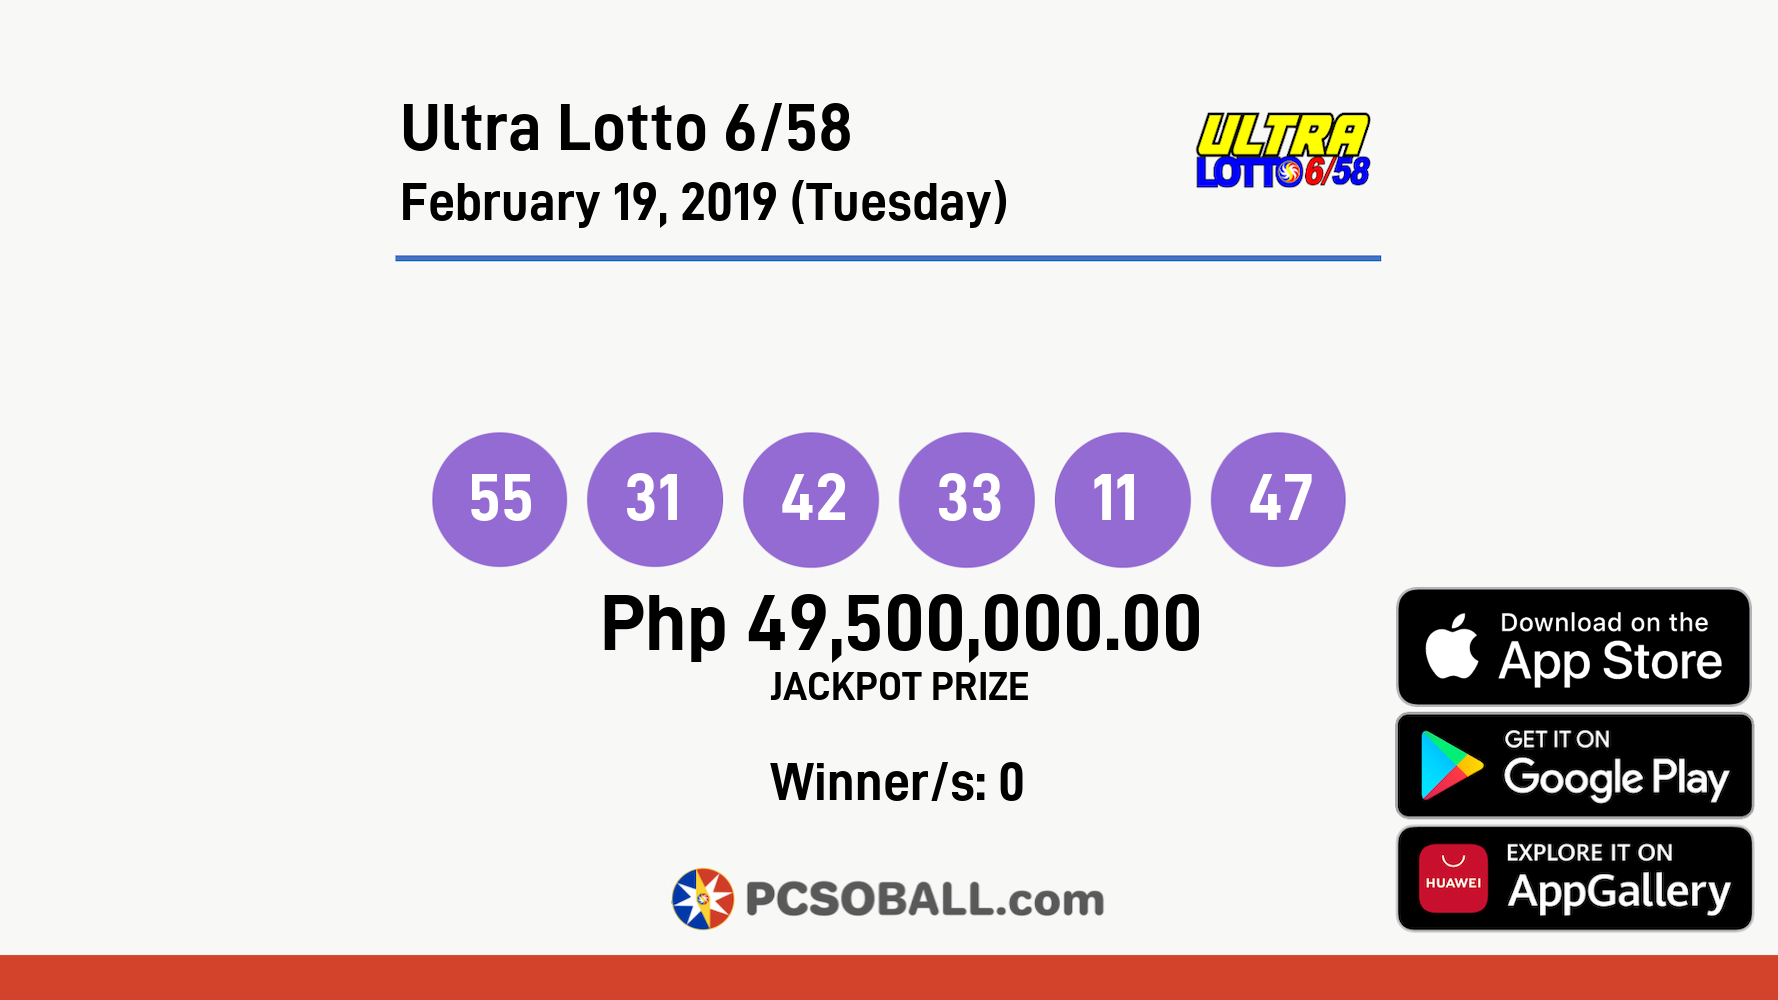 Ultra Lotto 6/58 February 19, 2019 (Tuesday) Result